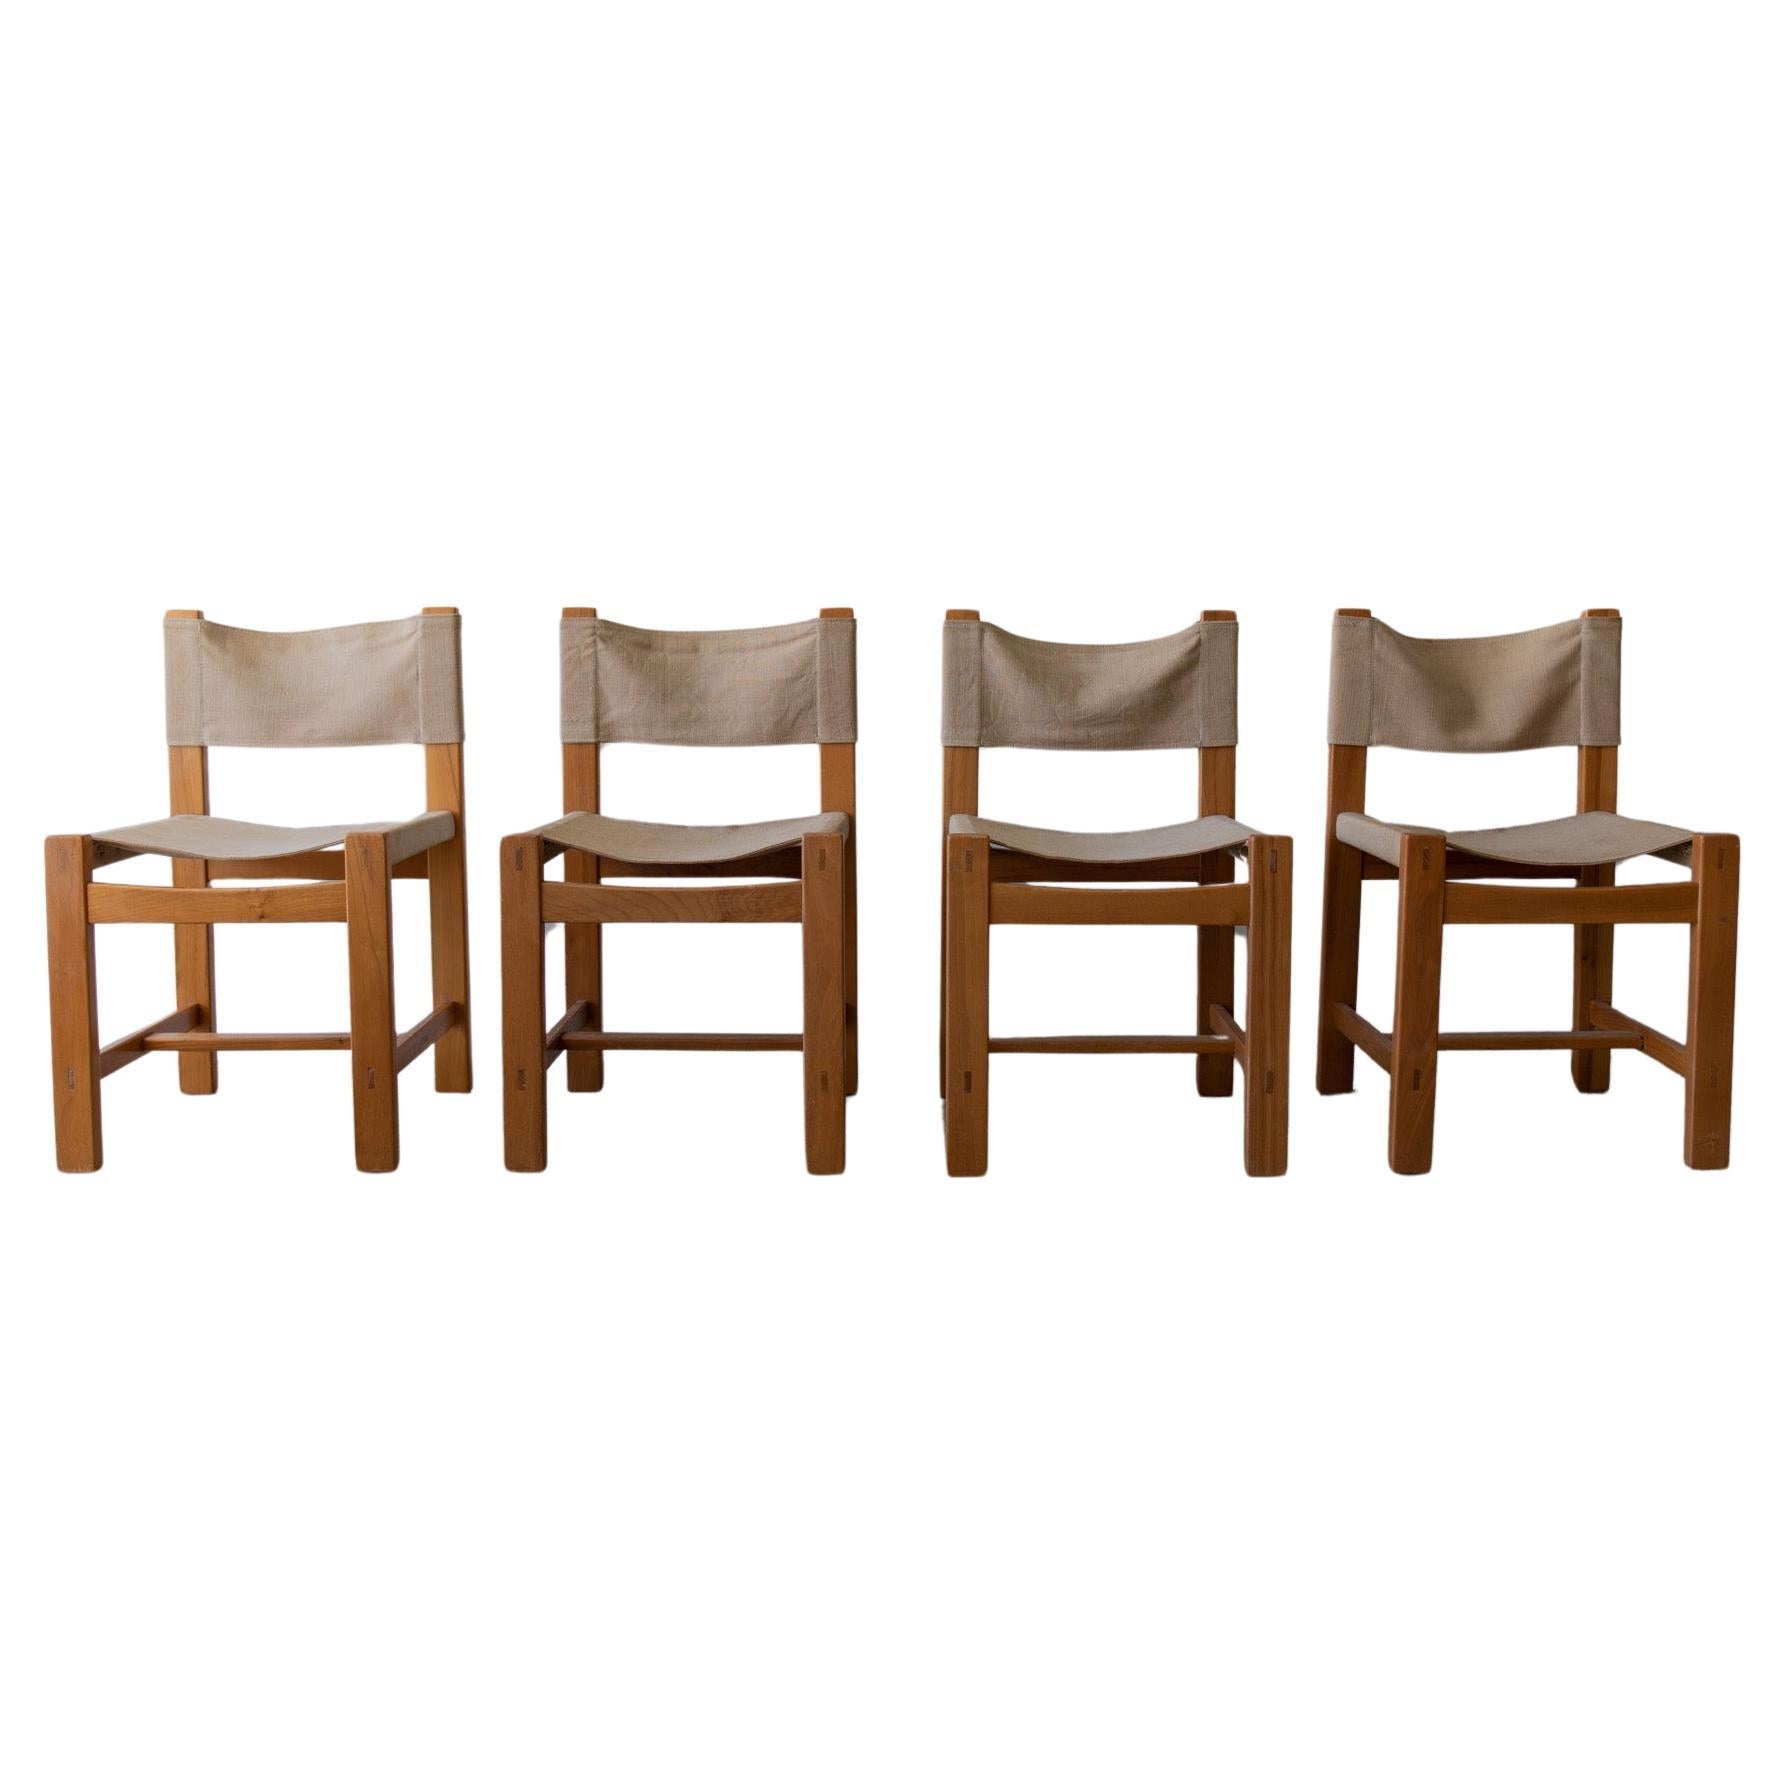 Set of 4 Chairs by Maison Regain